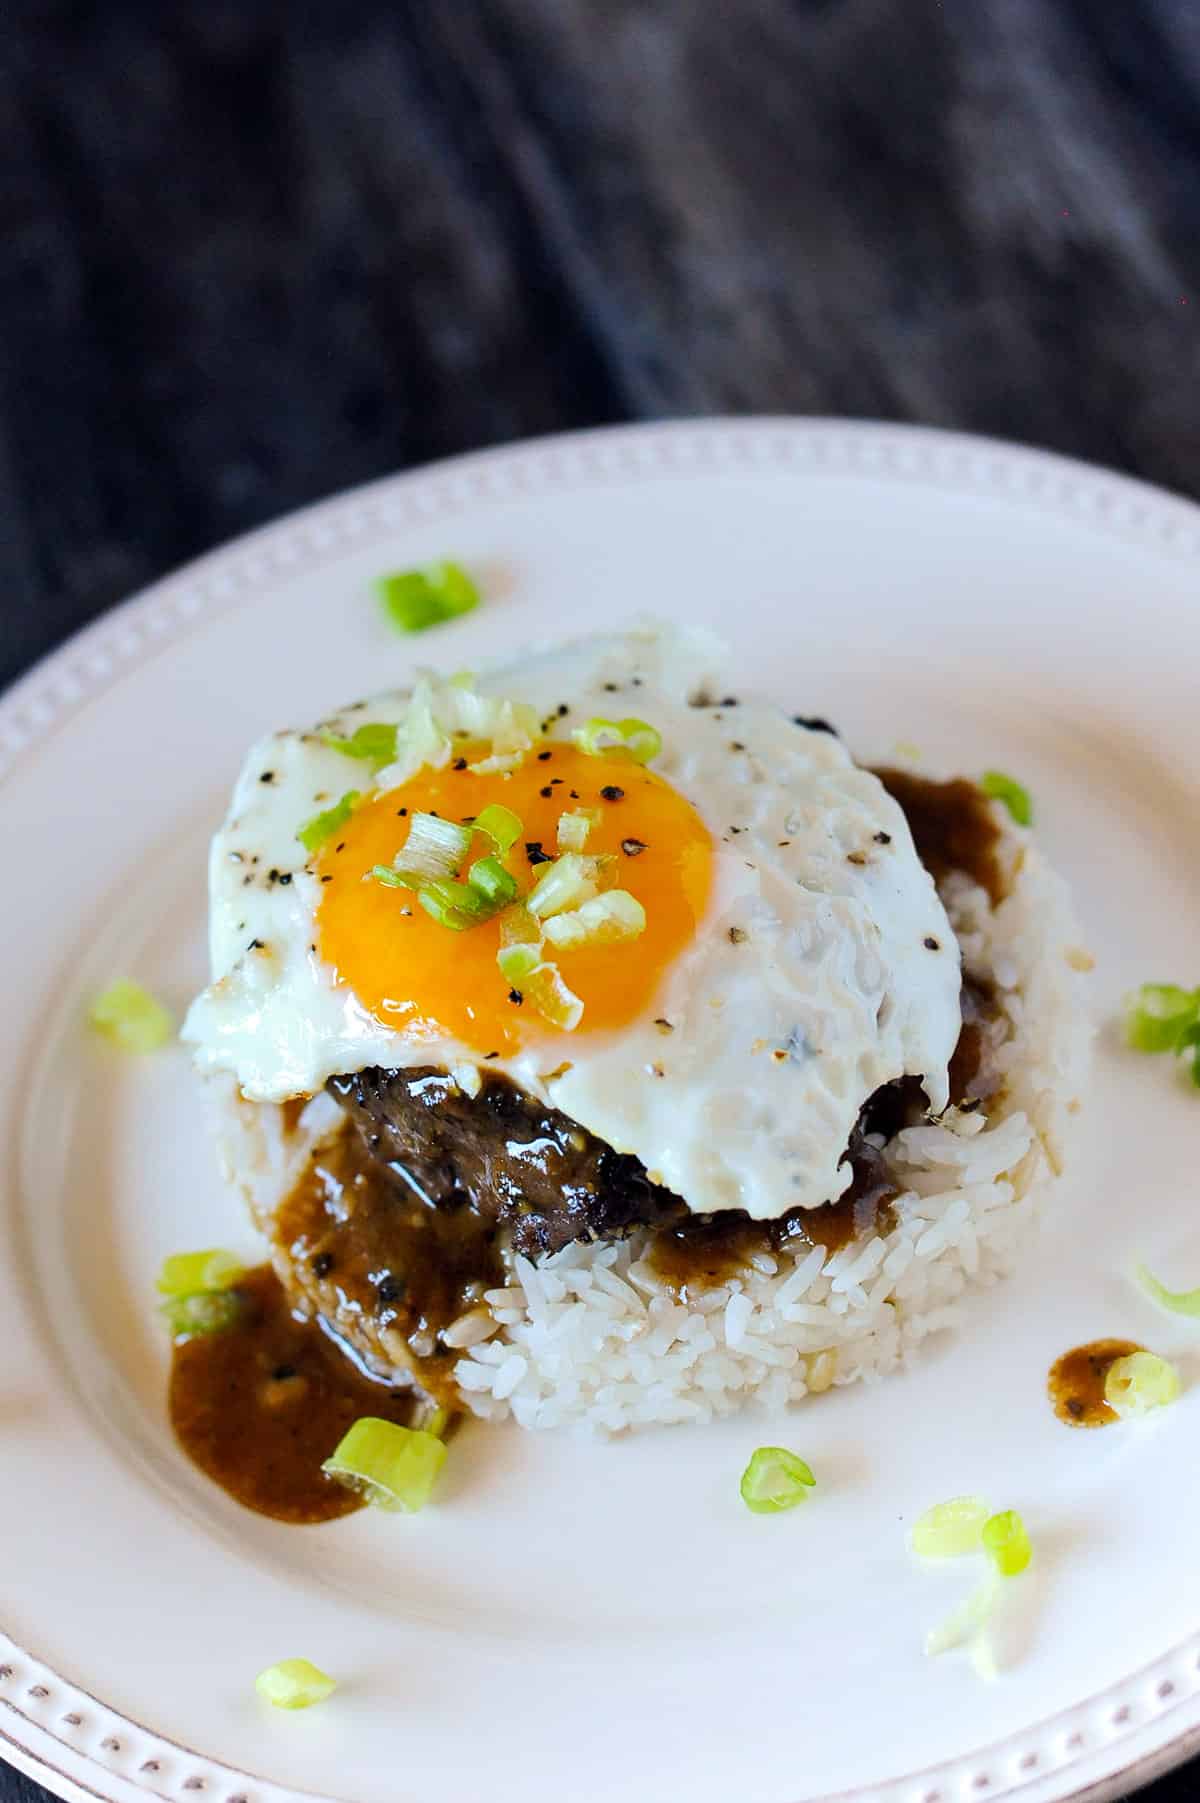 loco moco: beef patty on rice with fried egg.